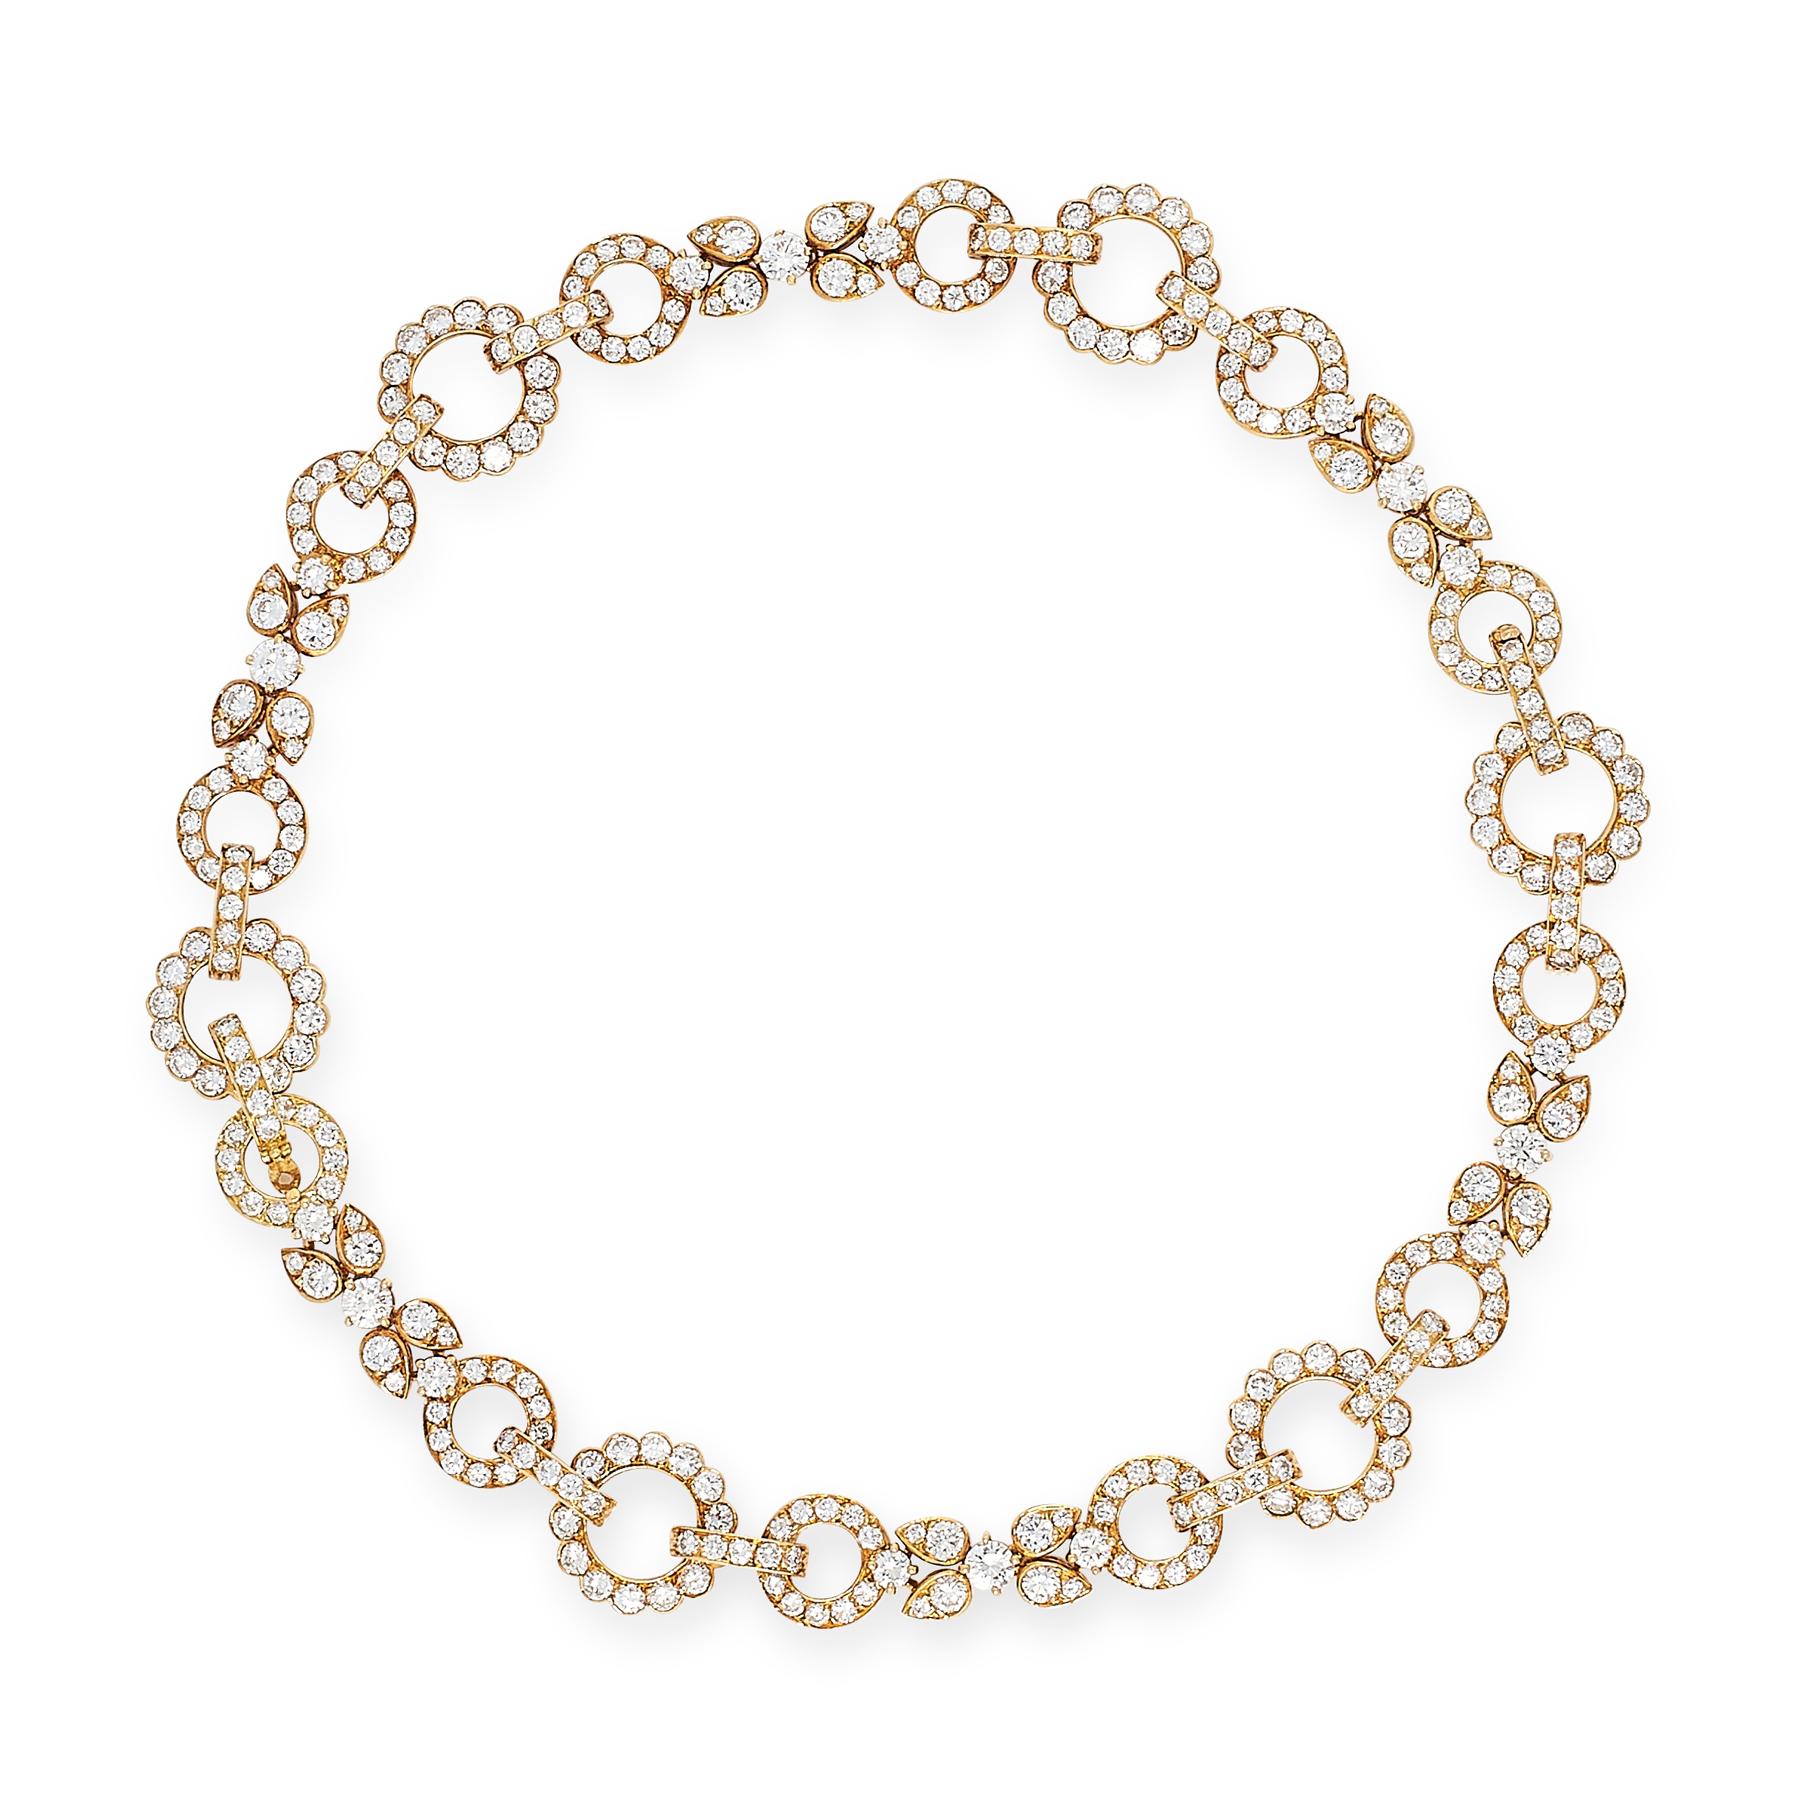 VAN CLEEF & ARPELS, IMPORTANT 18ct GOLD DIAMOND NECKLACE/BRACELET/BROOCH SET. The diamond-set necklace can be divided into 3 separate parts to be worn as bracelets, or a shorter necklace and a bracelet. The diamond-set pendant designed as 3 halo's